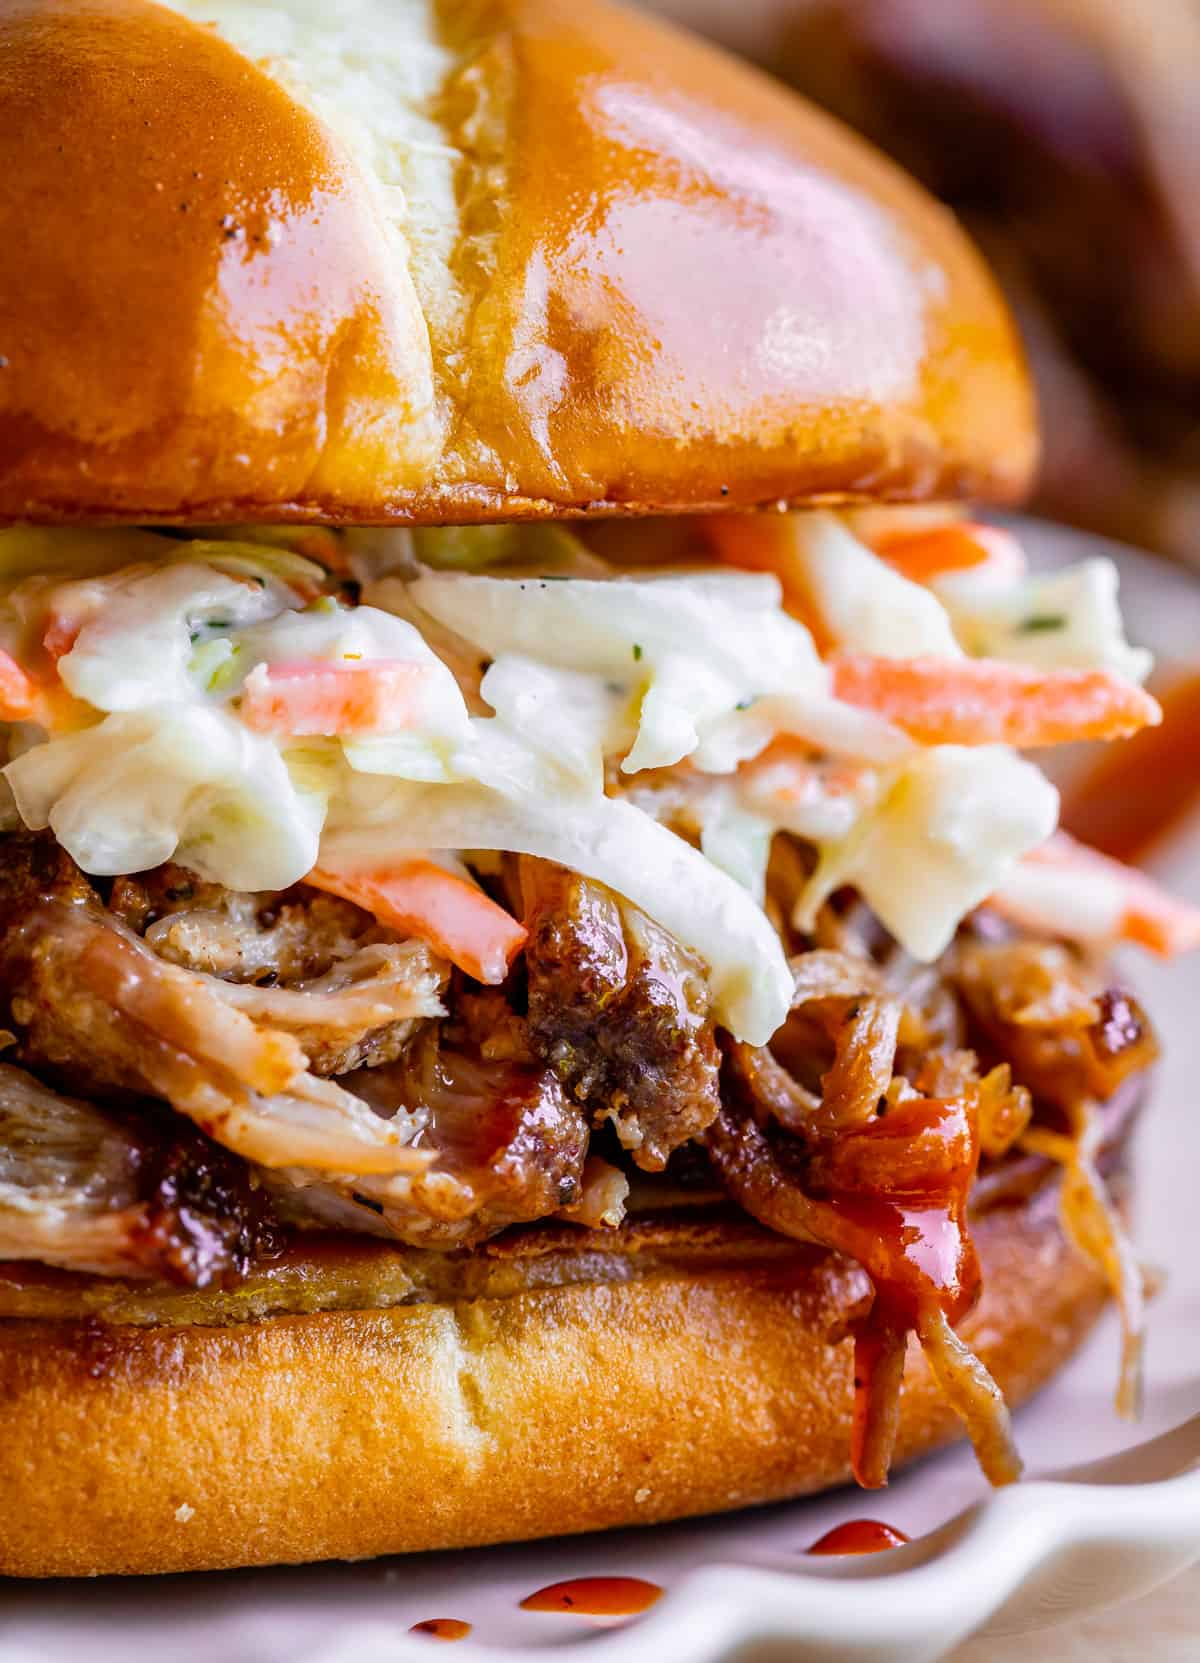 https://thefoodcharlatan.com/wp-content/uploads/2022/07/Smoked-BBQ-Pulled-Pork-on-a-Gas-Grill-19.jpg